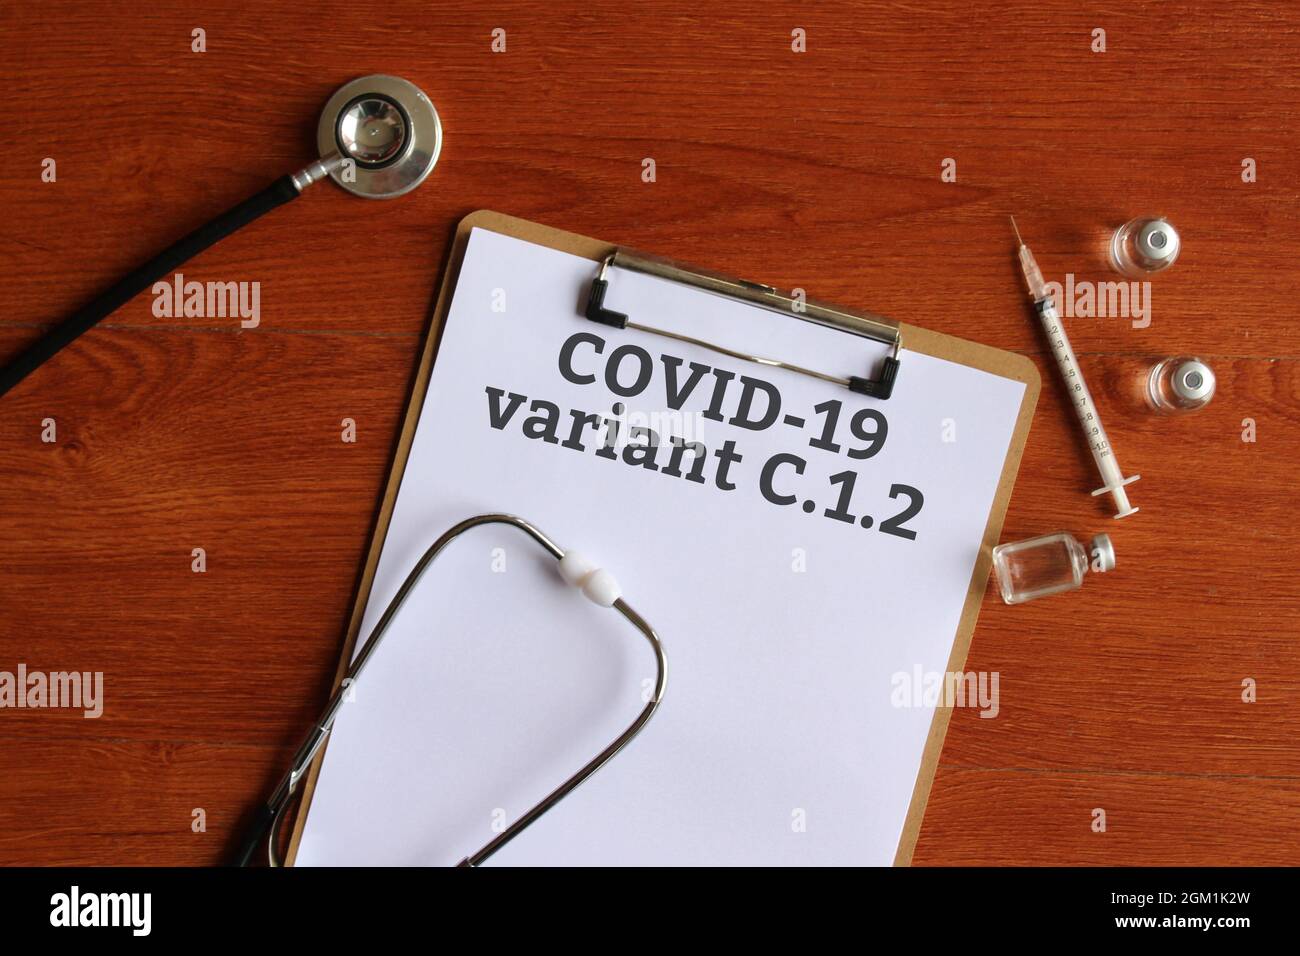 Medical concept. Top view of paper clipboard with text Covid-19 variant C.1.2, stethoscope, glass vial and syringe. Stock Photo